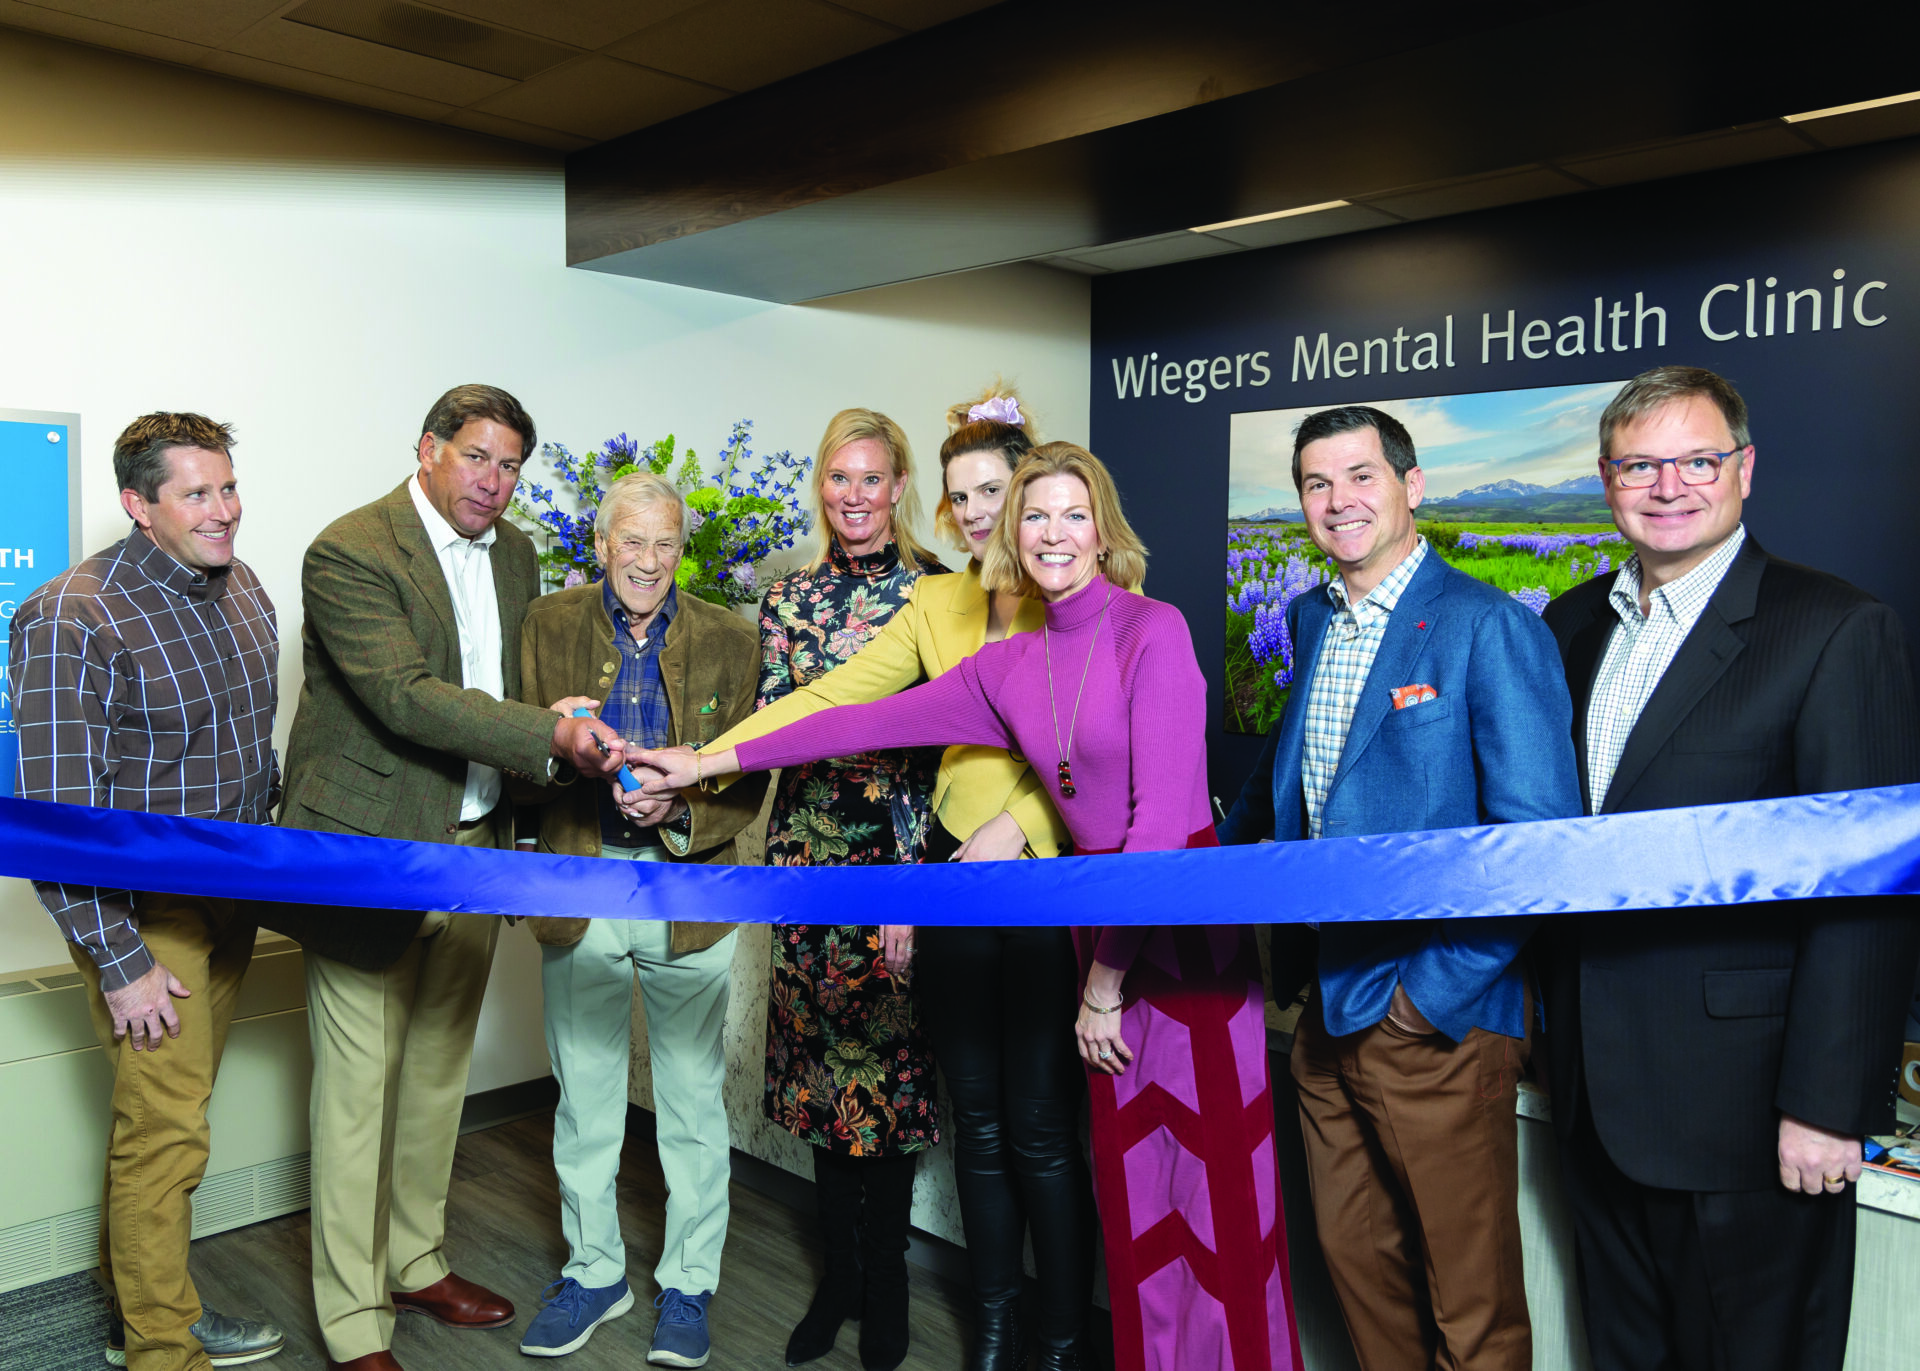 The Wiegers Mental Health Clinic opened in January 2023 in the Edwards Community Health Campus as the main location for outpatient services through Vail Health’s EVBH providers.